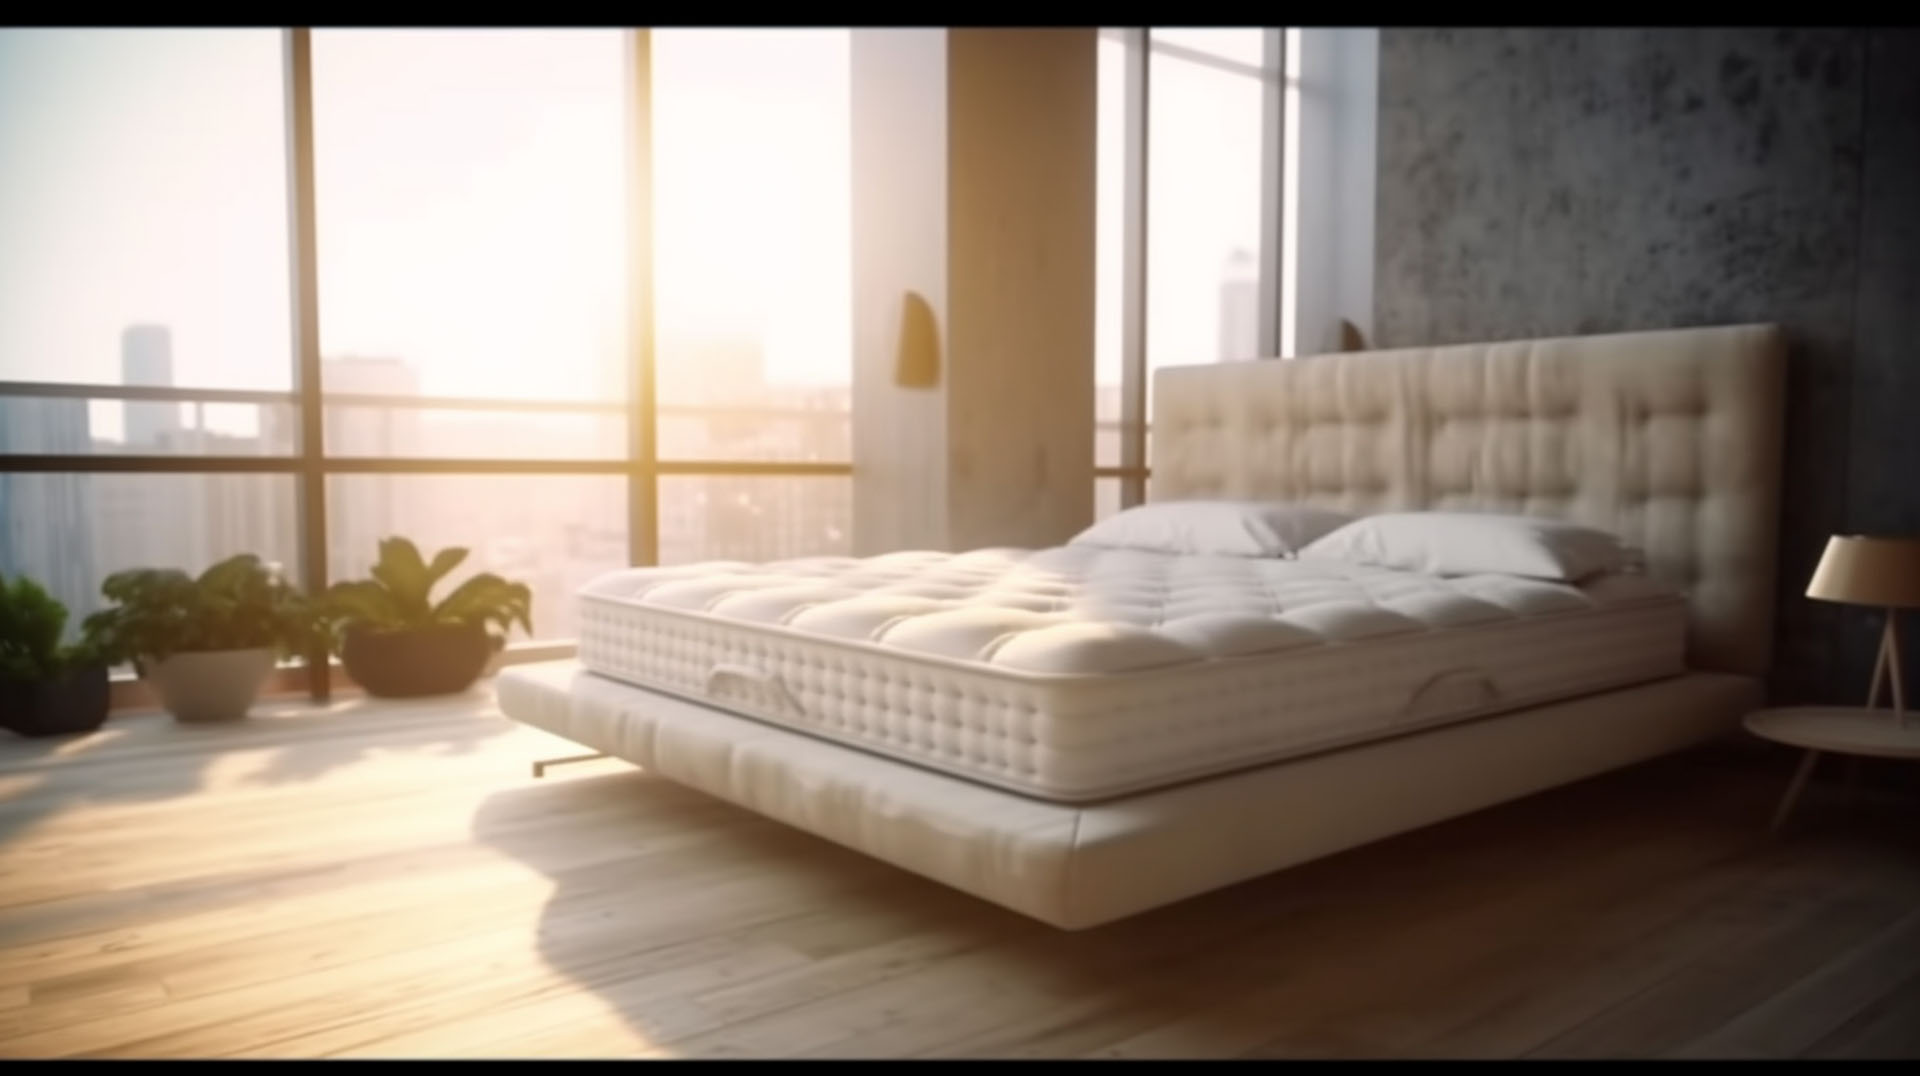 Wichita Falls organic mattresses are the perfect way to get a good night's sleep without sacrificing comfort or your health